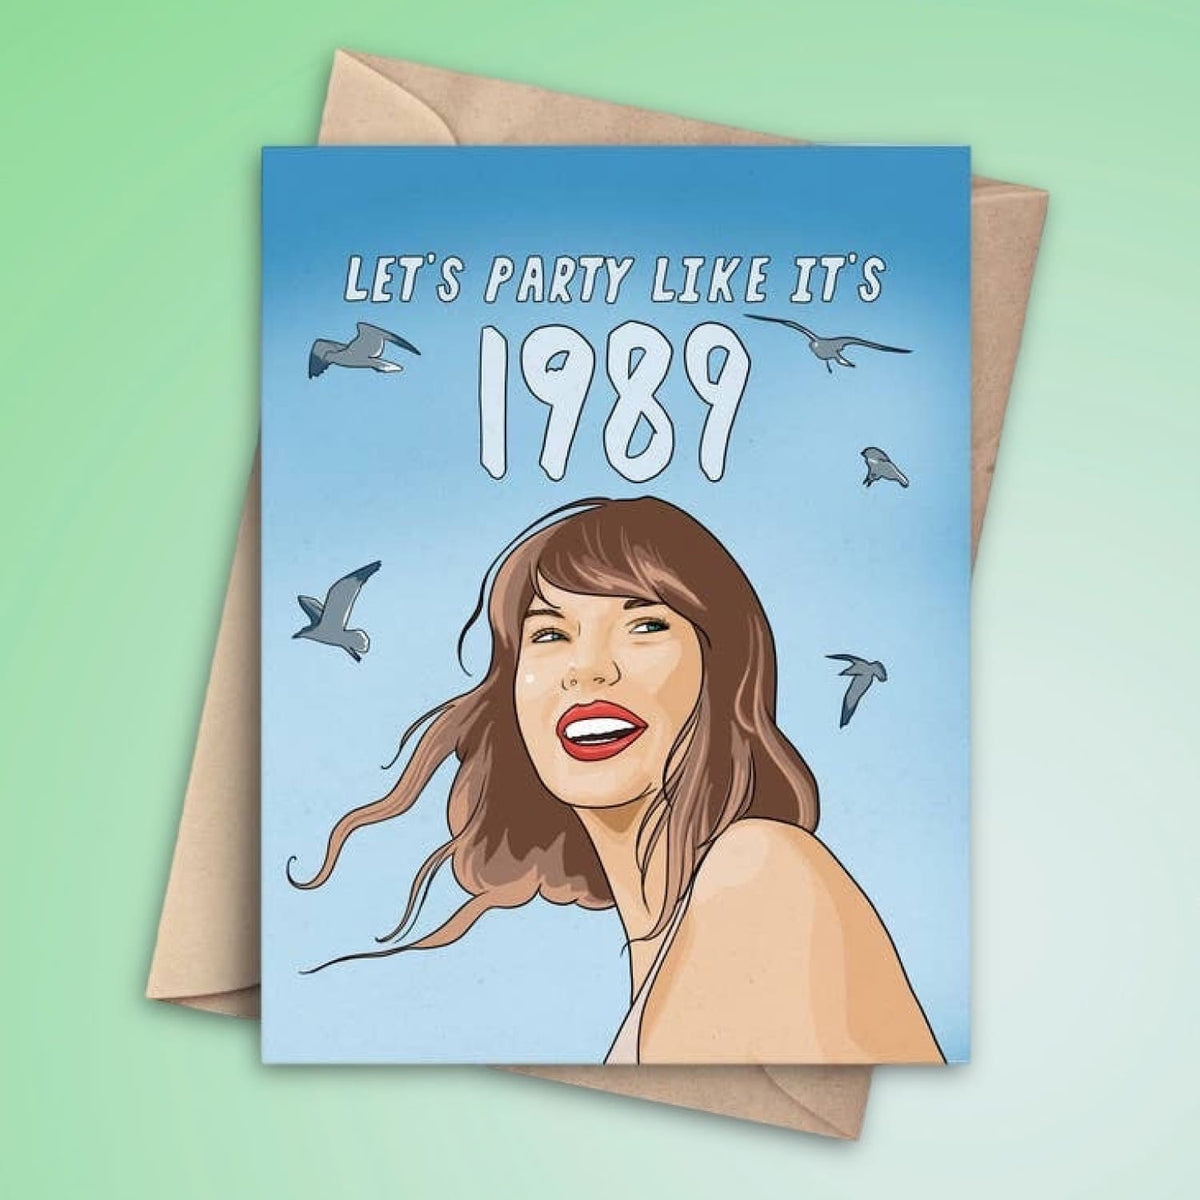 Taylor 1989 New Year Greeting Card Bff Gift - Celeb Obssesed